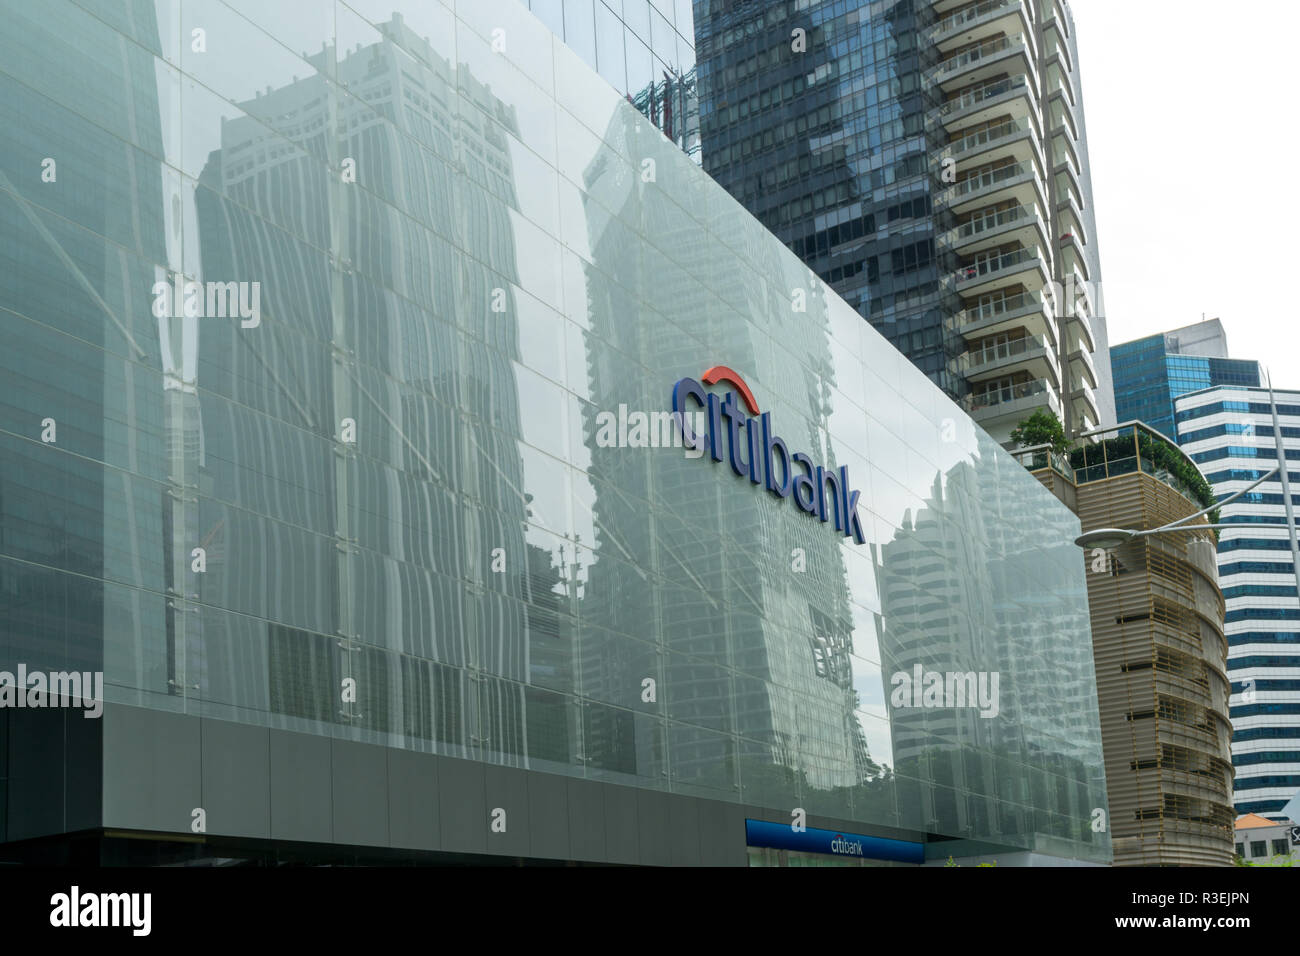 Singapore - September 16 2017: Citibank sign in the office building in Central Business District in Singapore with no people in natural light, daytime Stock Photo